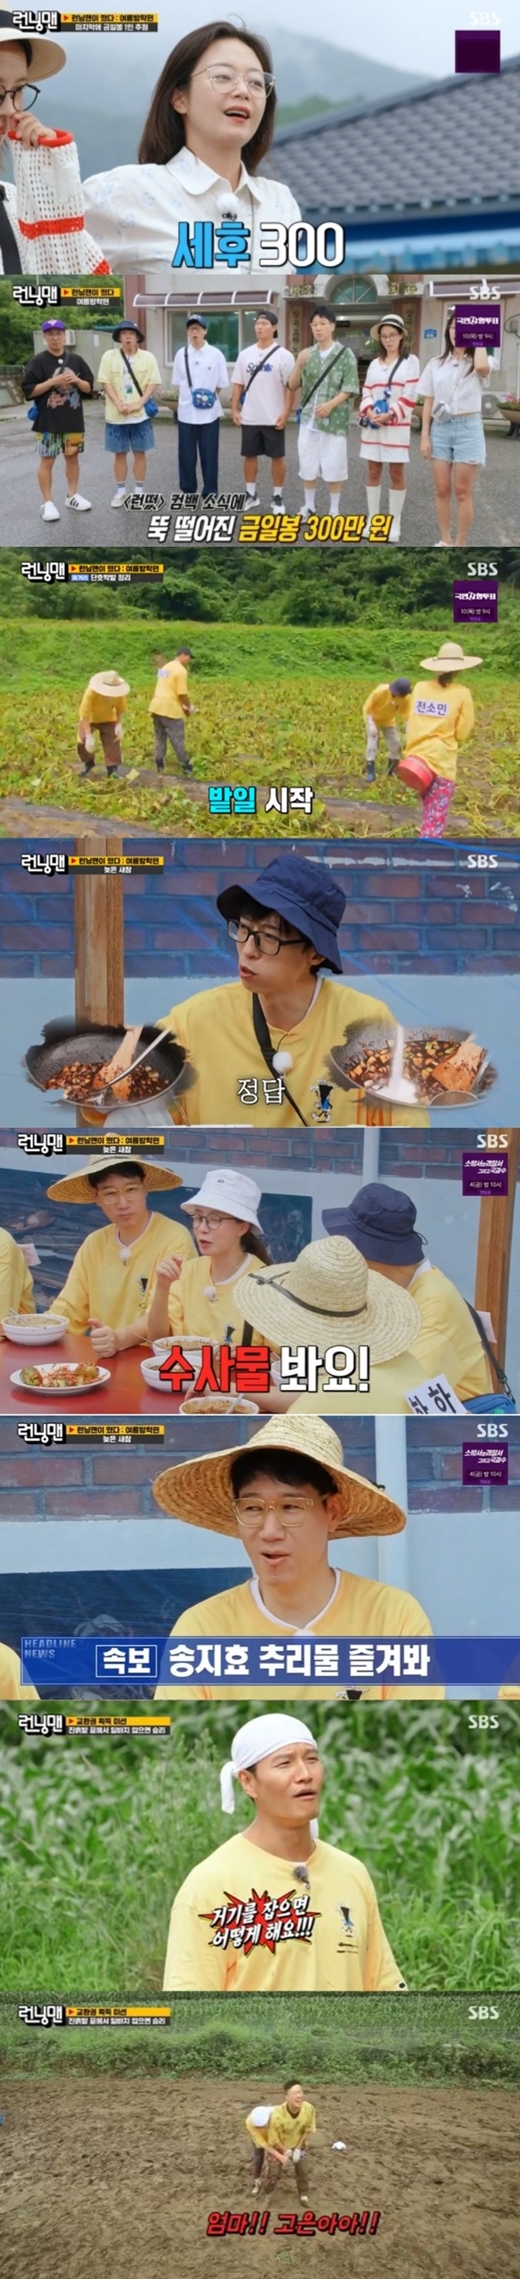 SBS Running Man has entered Summer Days with Coo Special for 4 weeks with Running Man - Summer Days with Coo .The 30-day broadcast was anticipated and added to the excitement of the topic, Summer Days with Coo.The members decided to send Summer Days with Coo at my grandmothers house in Gangwon-do, and the production team offered to present a gilt-bronze right of exchange one by one when I wrote my good points.However, a member who has been pointed out as a target of development confiscates the right of exchange.Yoo Jae-Suk, Ji Suk-jin, Kim Jong-kook, and Jeon So-min headed to the field and the four of them decided to have a palm time for fun.Jeon So-min shouted to Yoo Jae-suk, Park Jae-seok, put your mouth in and get out of the way! Kim Jong-kook shouted, What are you doing! Park Jae-seok!In the end, Ji Suk-jin told the two men that they were going to get along well, but Kim Jong-kook was so loud that you laughed and laughed.The team decided to make suta jjajangmyeon and cucumber sobakyi, and Haha and Song Ji-hyo caught the eye by mentioning their mothers cooking skills.Haha said, My mother spit out her seaweed soup. Song Ji-hyo said, My mother was a person who put peaches in miso soup.Haha said  ⁇ Song Ji-hyo seems to know who he looks like.Yoo Jae-suk said, Nowadays Song Ji-hyo reports almost like a brother.When I couldnt answer the phone, I called him again and he said, Im taking a shower now. The next day, he said, My brother, I love the day. He said, Ji Hyo, where are you going?In addition, Song Ji-hyo watched YouTube when she was in the shower, revealing her affection for the content of the rhetoric and surprised everyone.Afterwards, members challenged the muddy transition mission to receive an additional right of exchange. Veteran entertainers Yoo Jae-Suk and Haha became the first contenders, and as expected, they gave a big smile with dirty plays.This scene was the highest audience rating of 4.8% per minute, and it took the best one minute. The result of the fierce confrontation between the two will be revealed on the main broadcast next week.